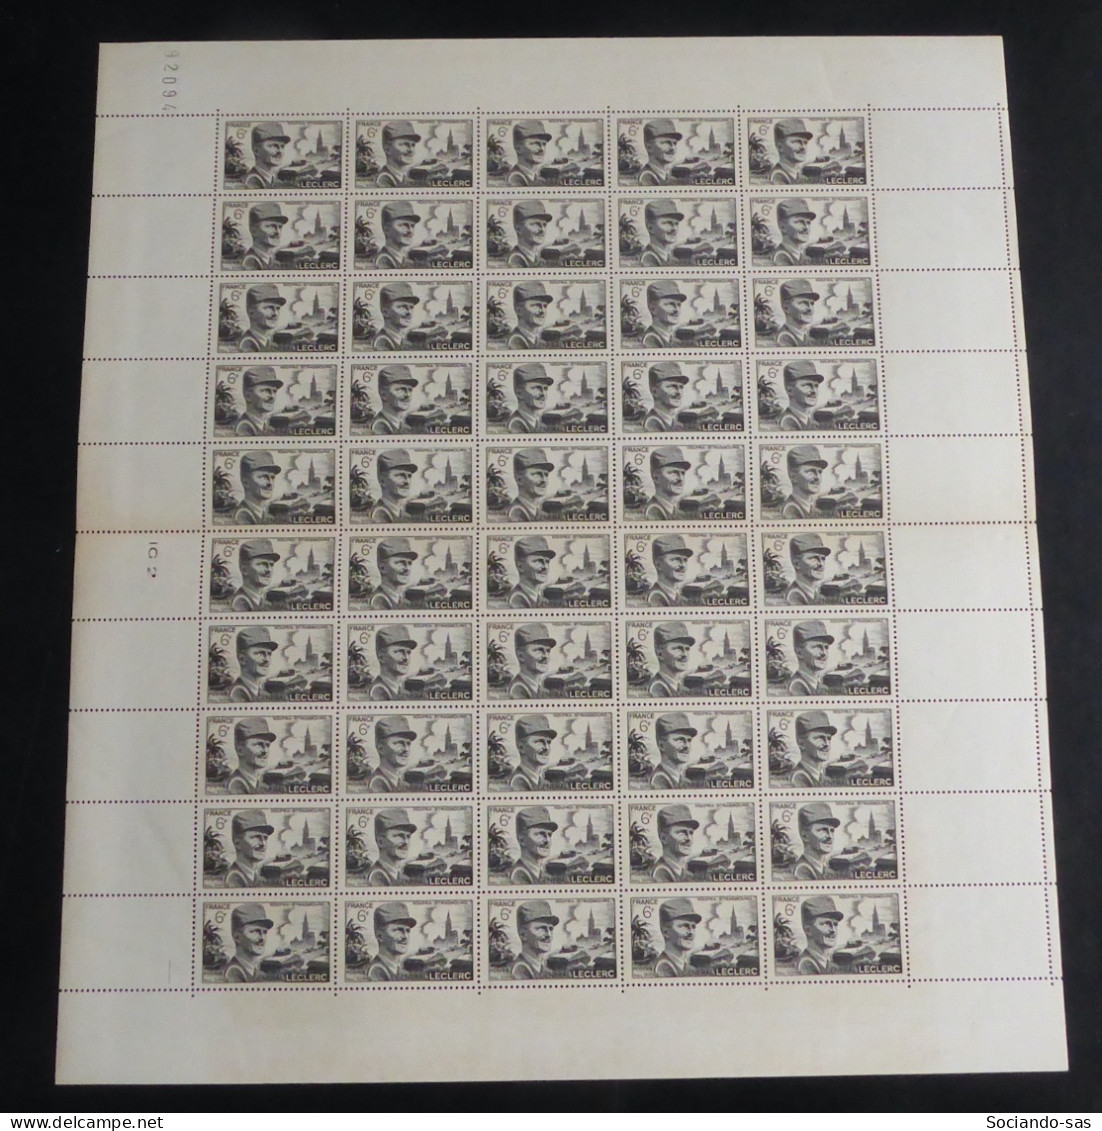 FRANCE - 1948 - N°YT. 815 - Général Leclerc - Feuille Complète - Neuf Luxe ** / MNH - Full Sheets